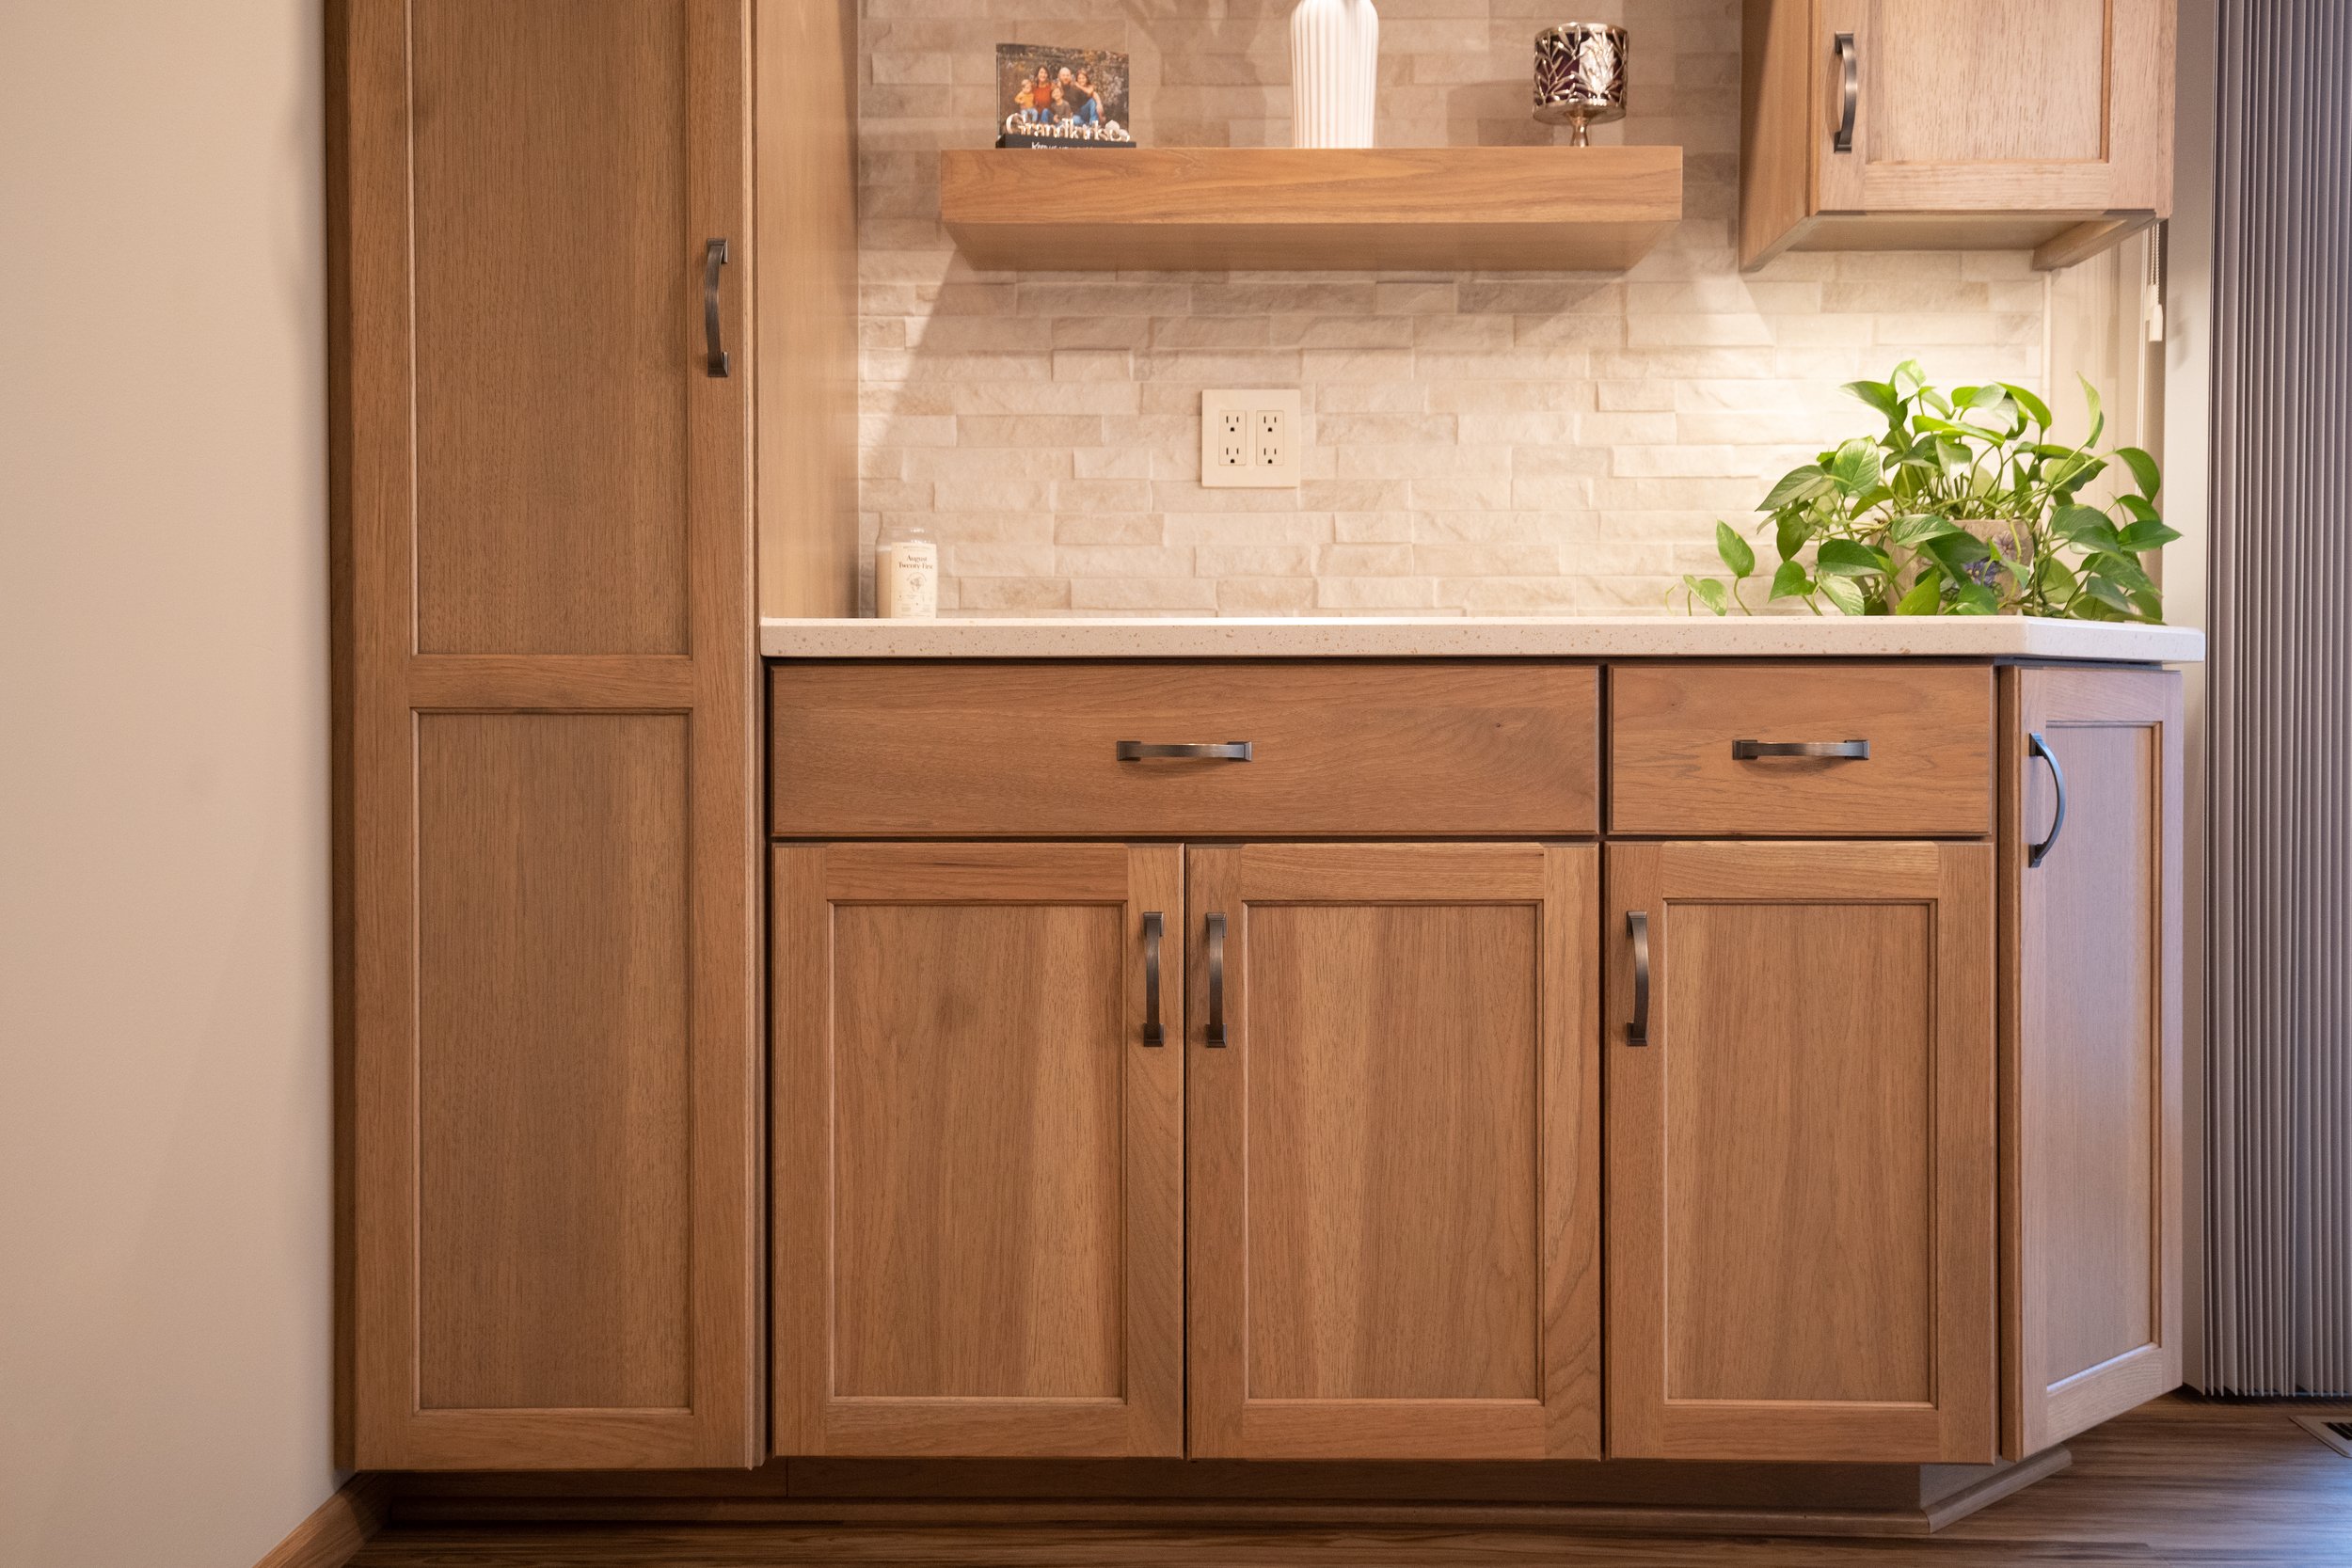 Kitchen Cabinets Versus Drawers - Pros, Cons